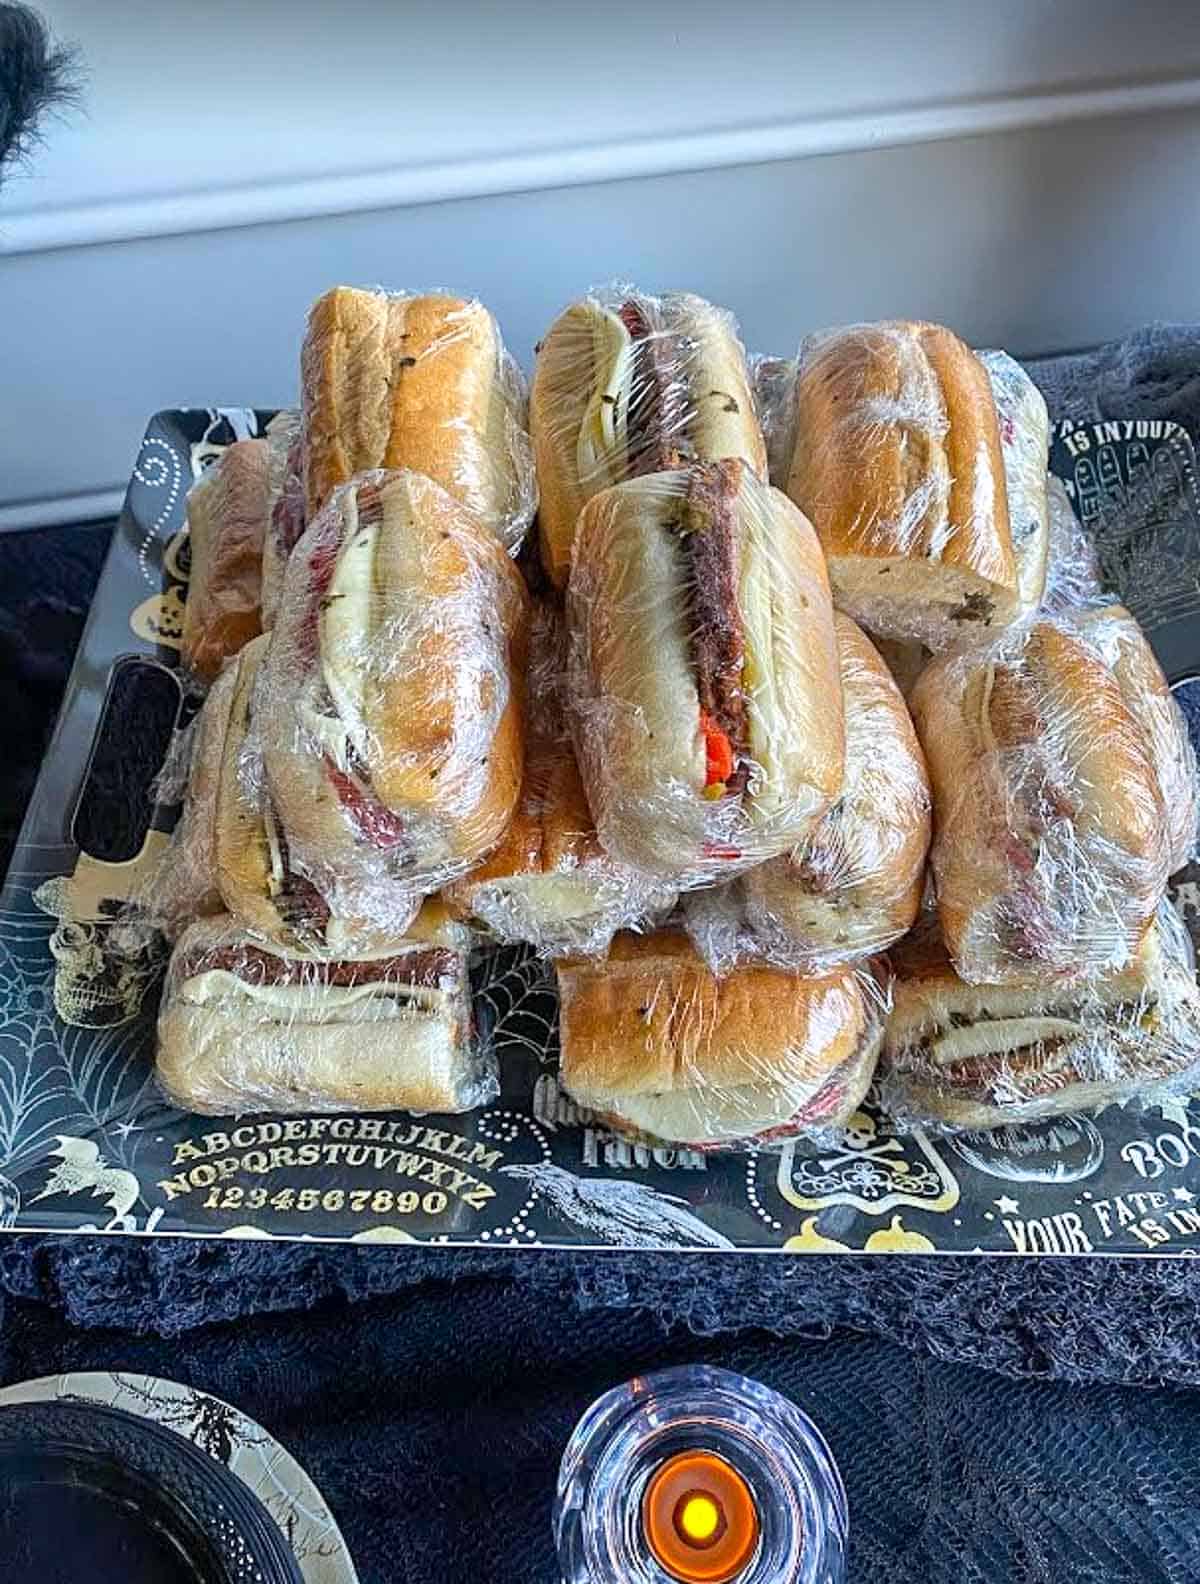 Wrapped primos sandwiches for party.